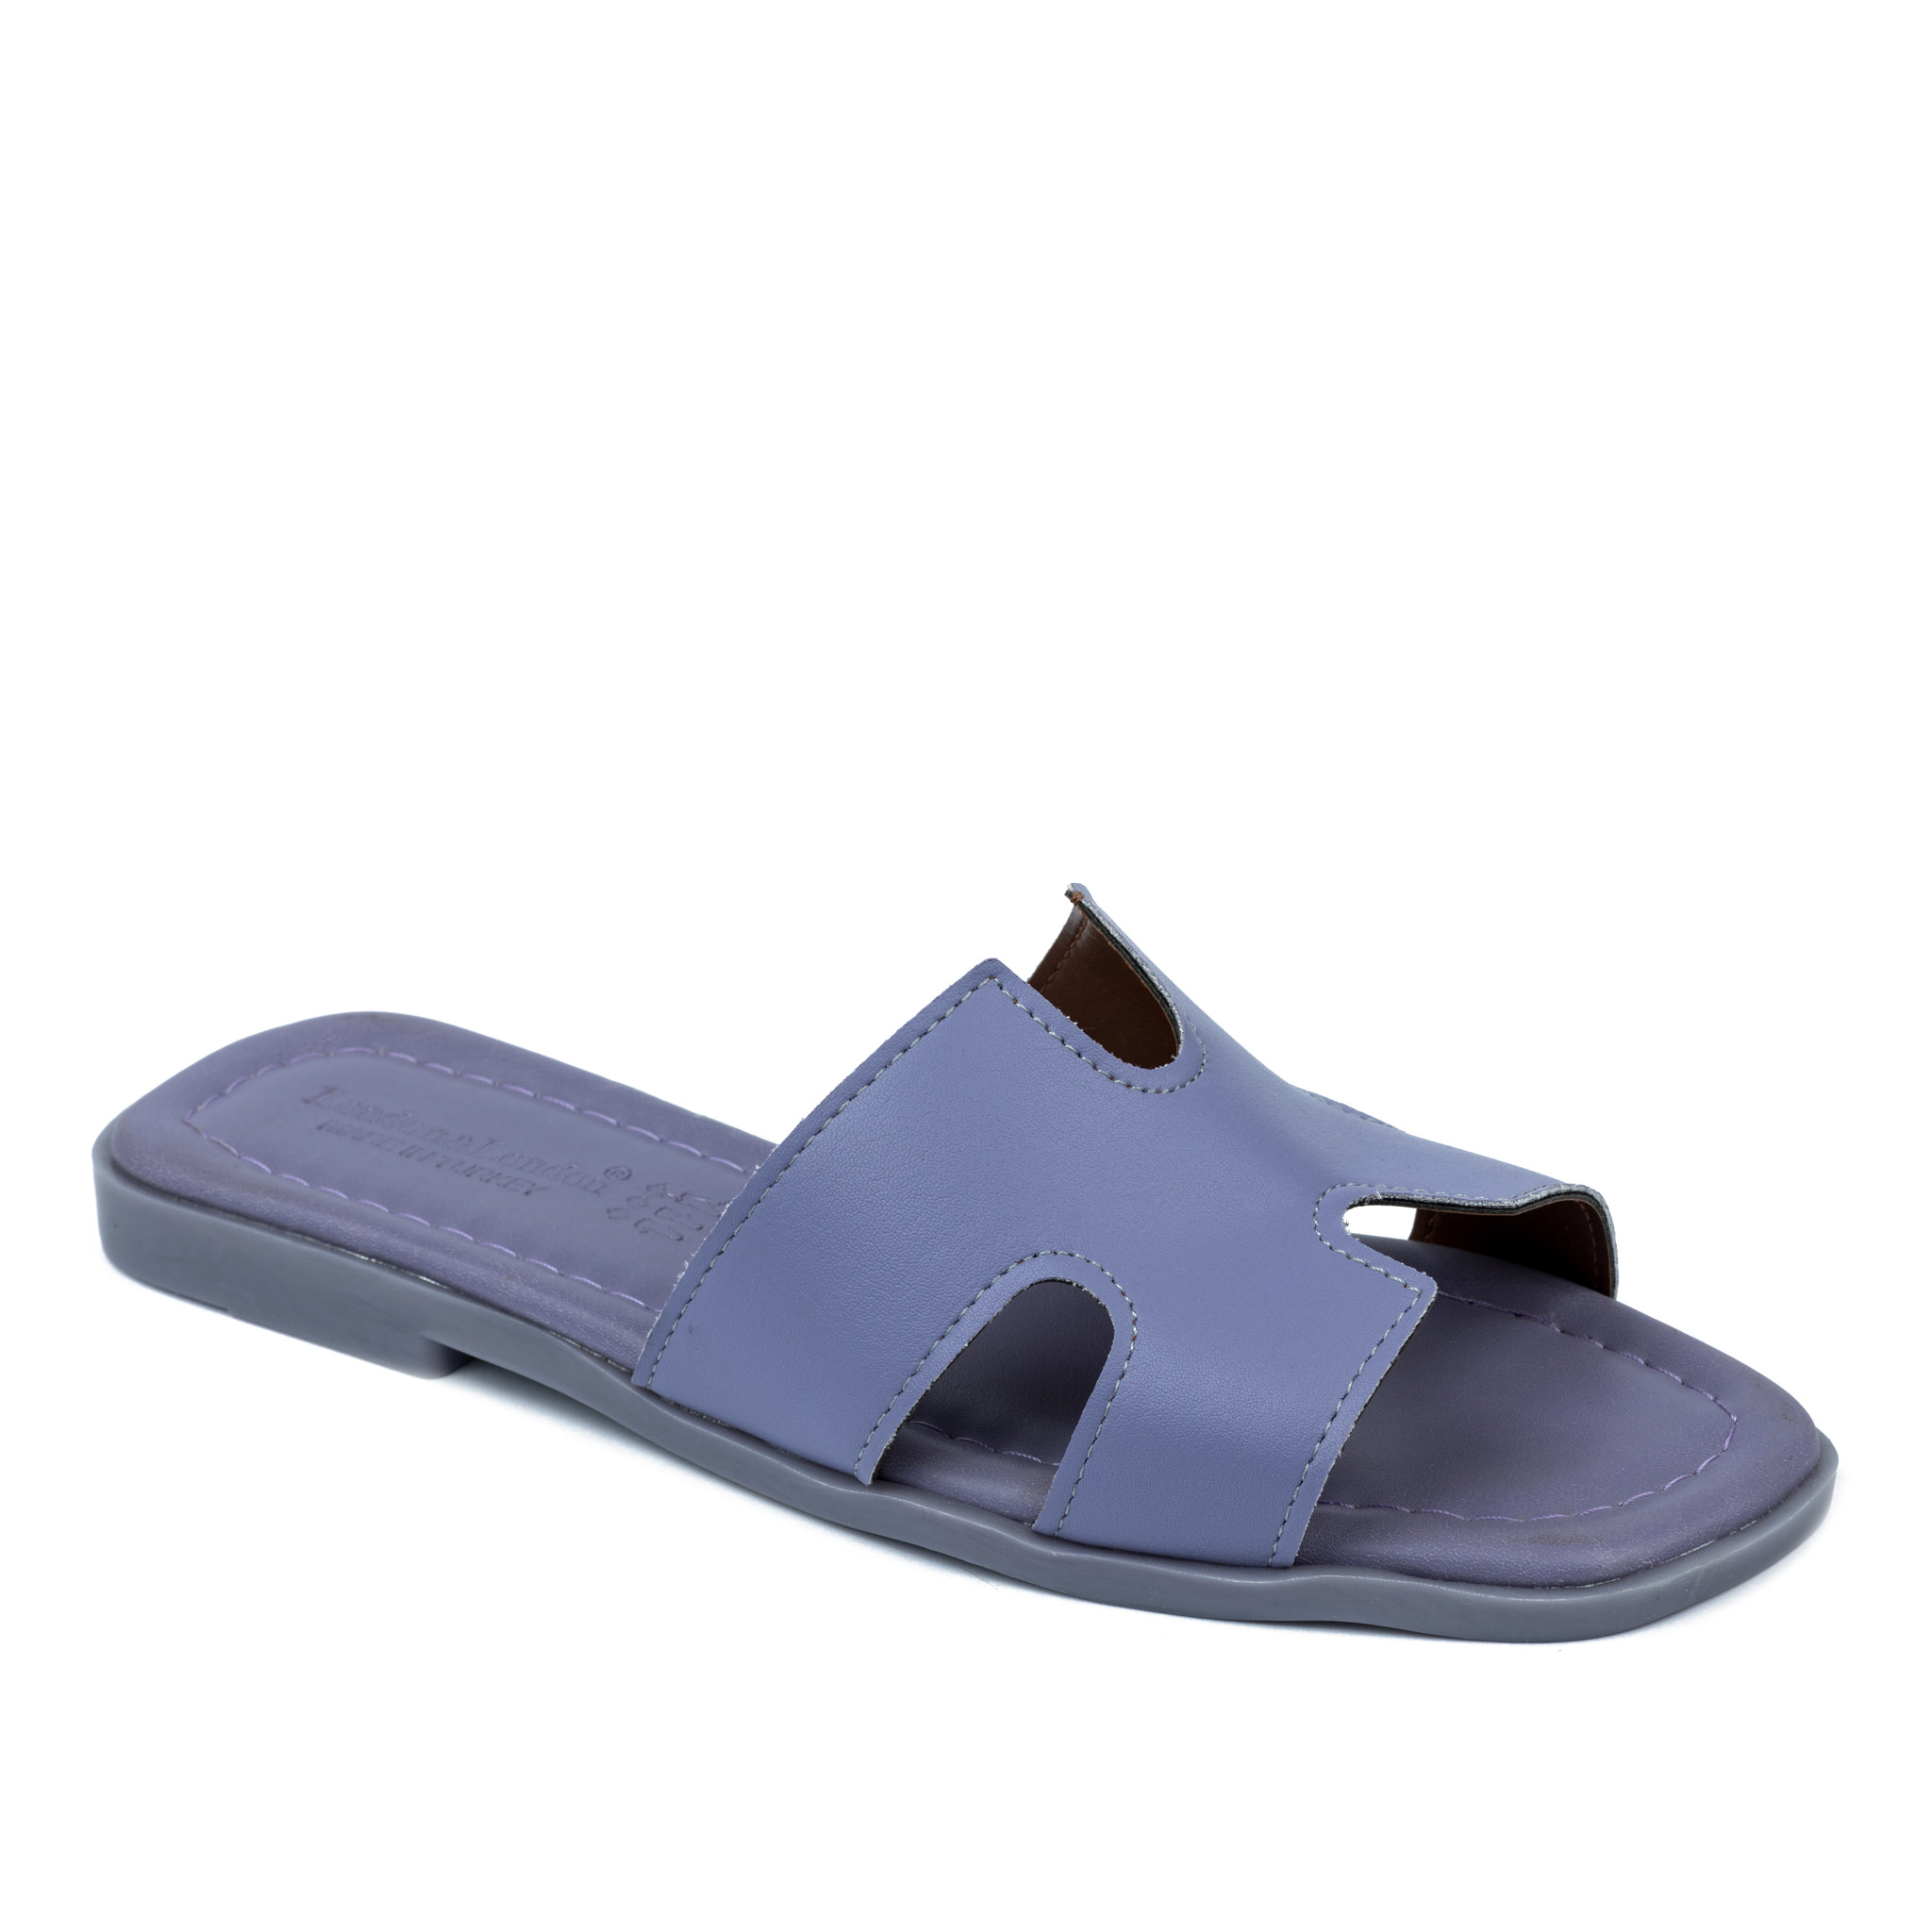 Women Slippers and Mules A549 - VIOLET